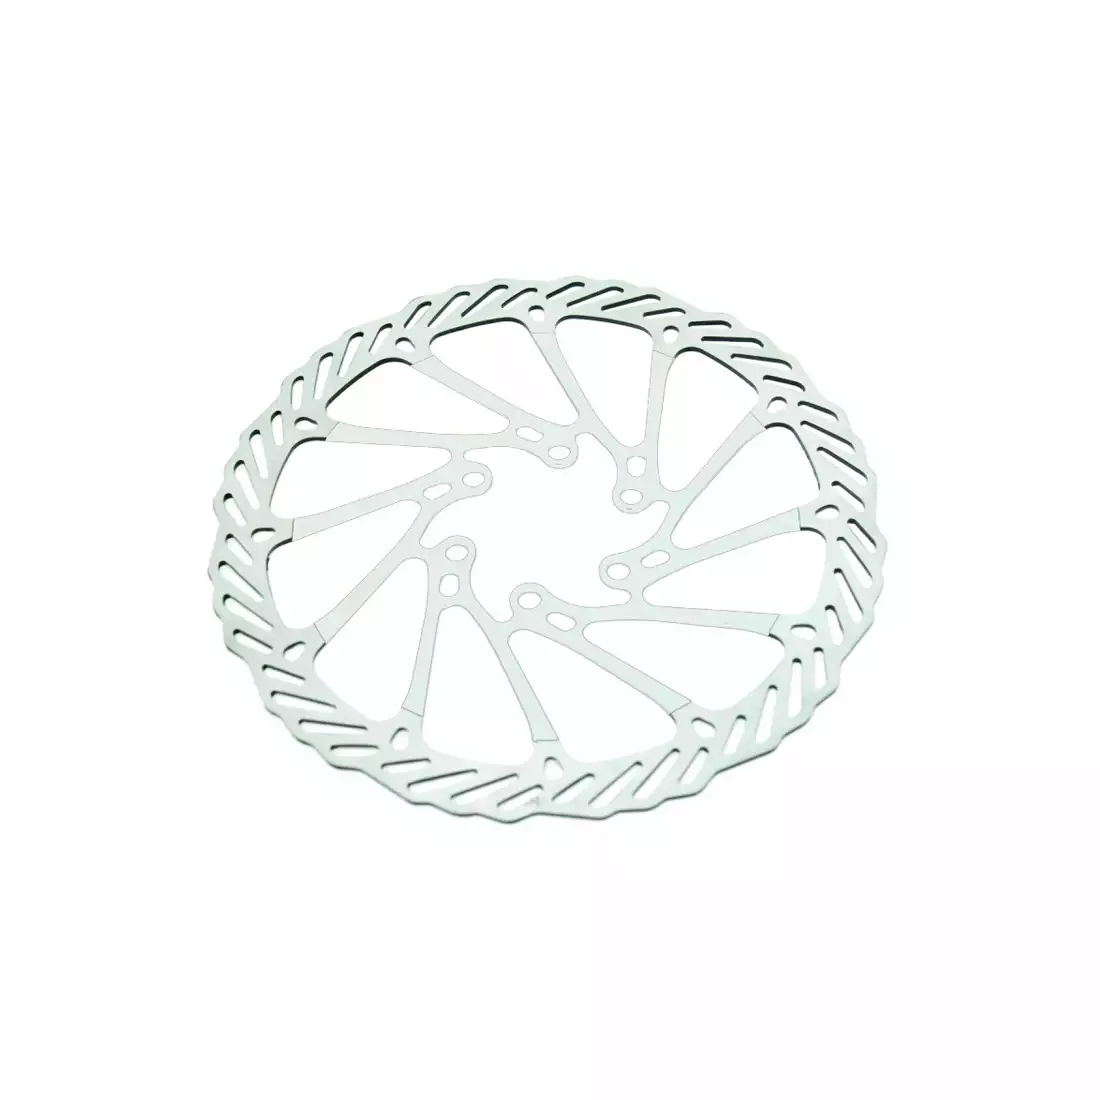 CLARKS CL brake disc 180 mm for 6 bolts IS silver